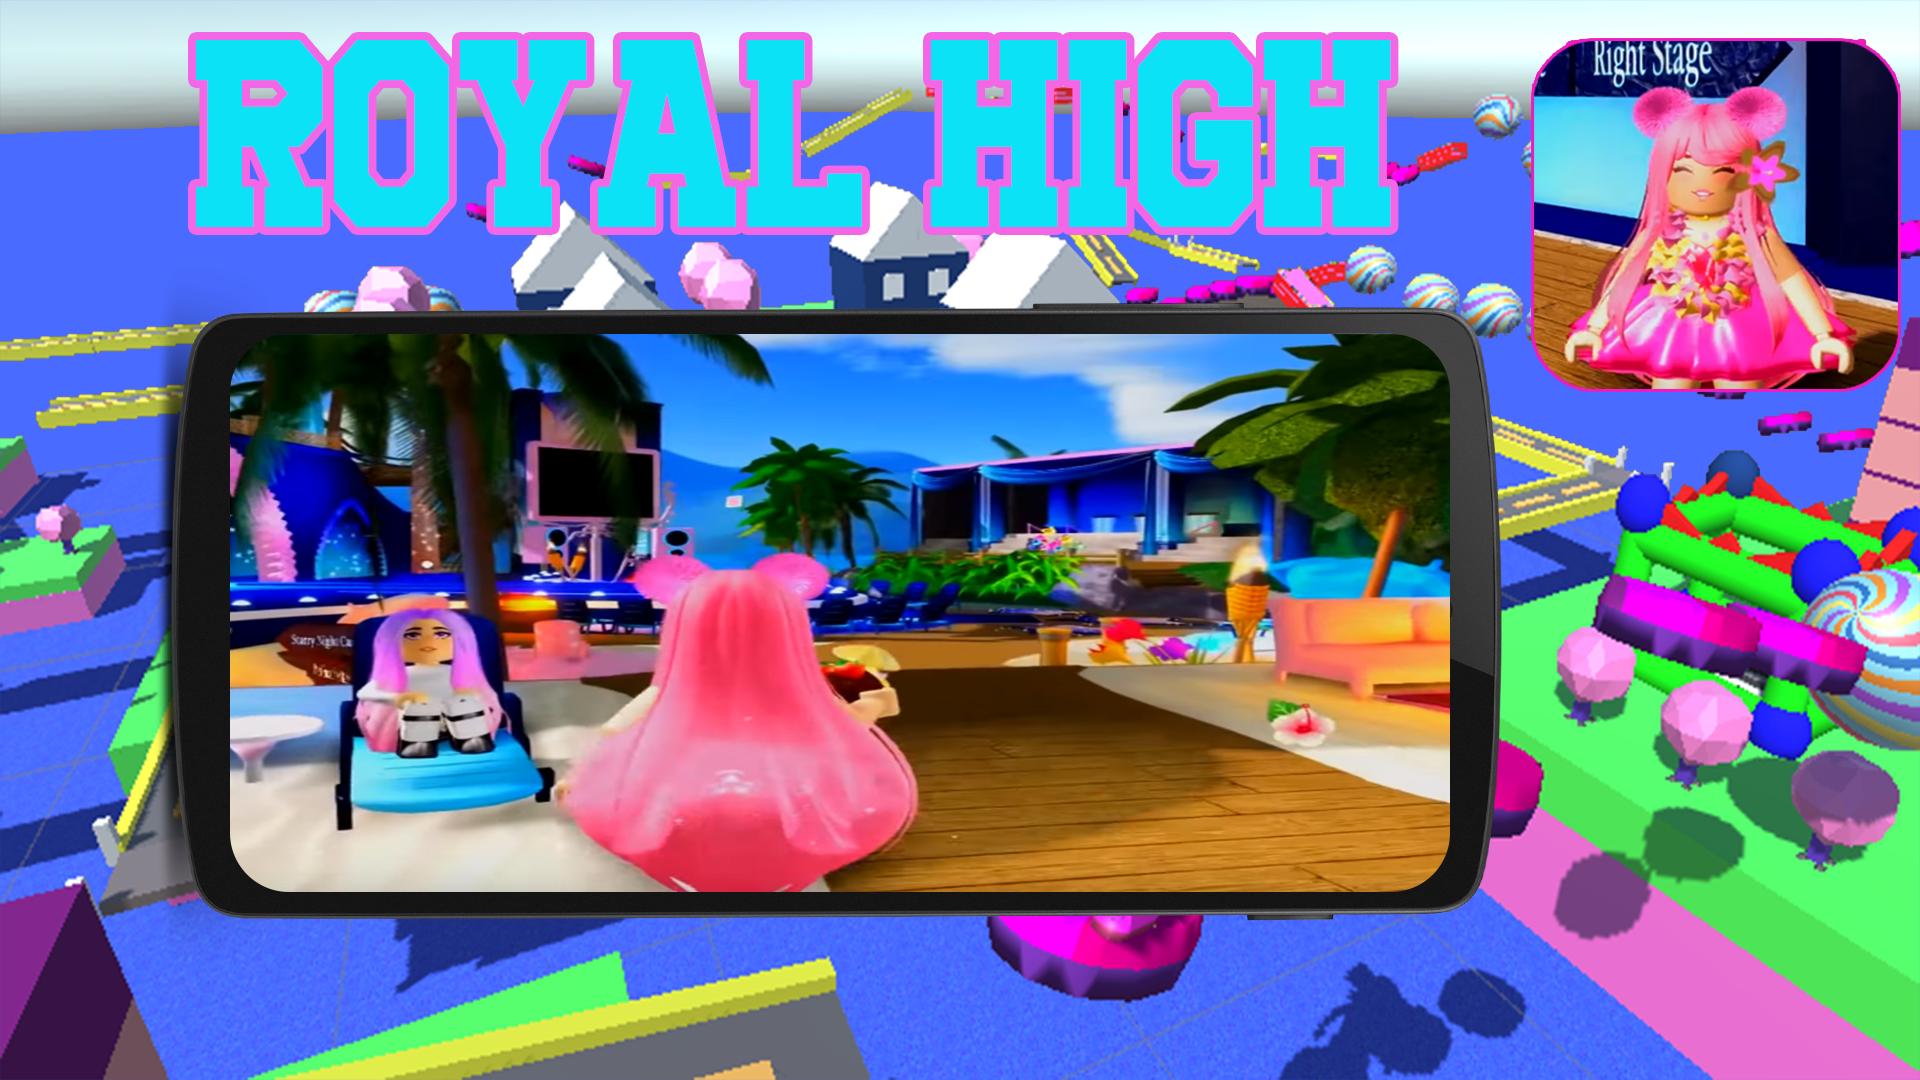 Royale High For Android Apk Download - roblox royale high game download